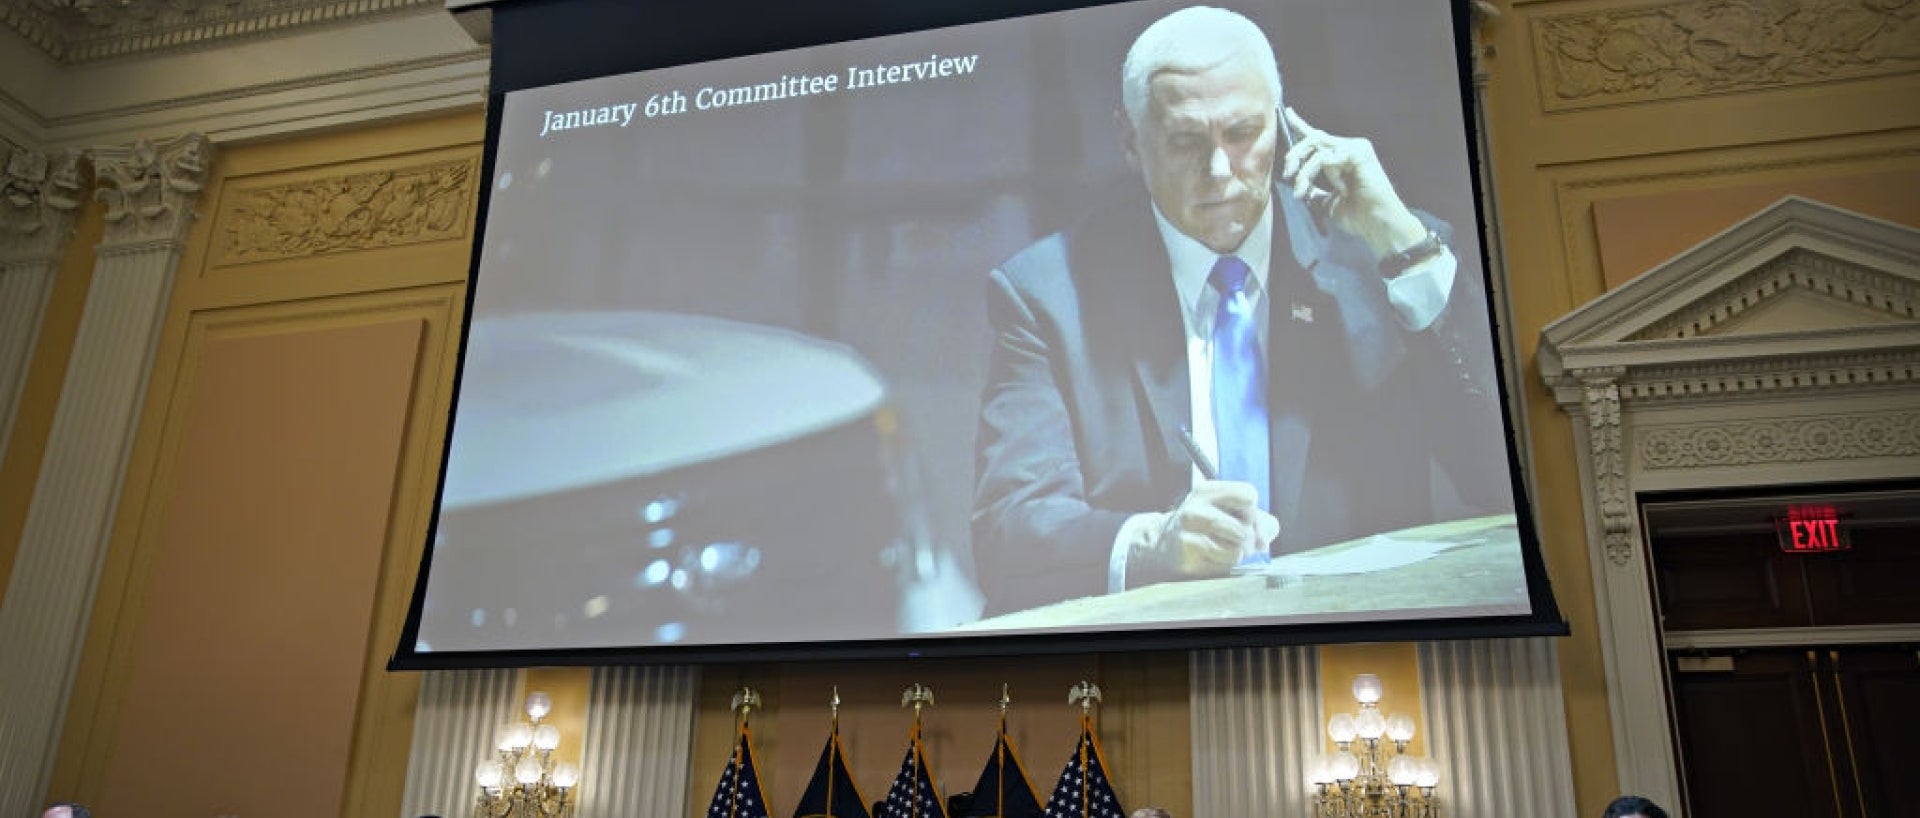 Video of Mike Pence on the phone shown during committee hearing